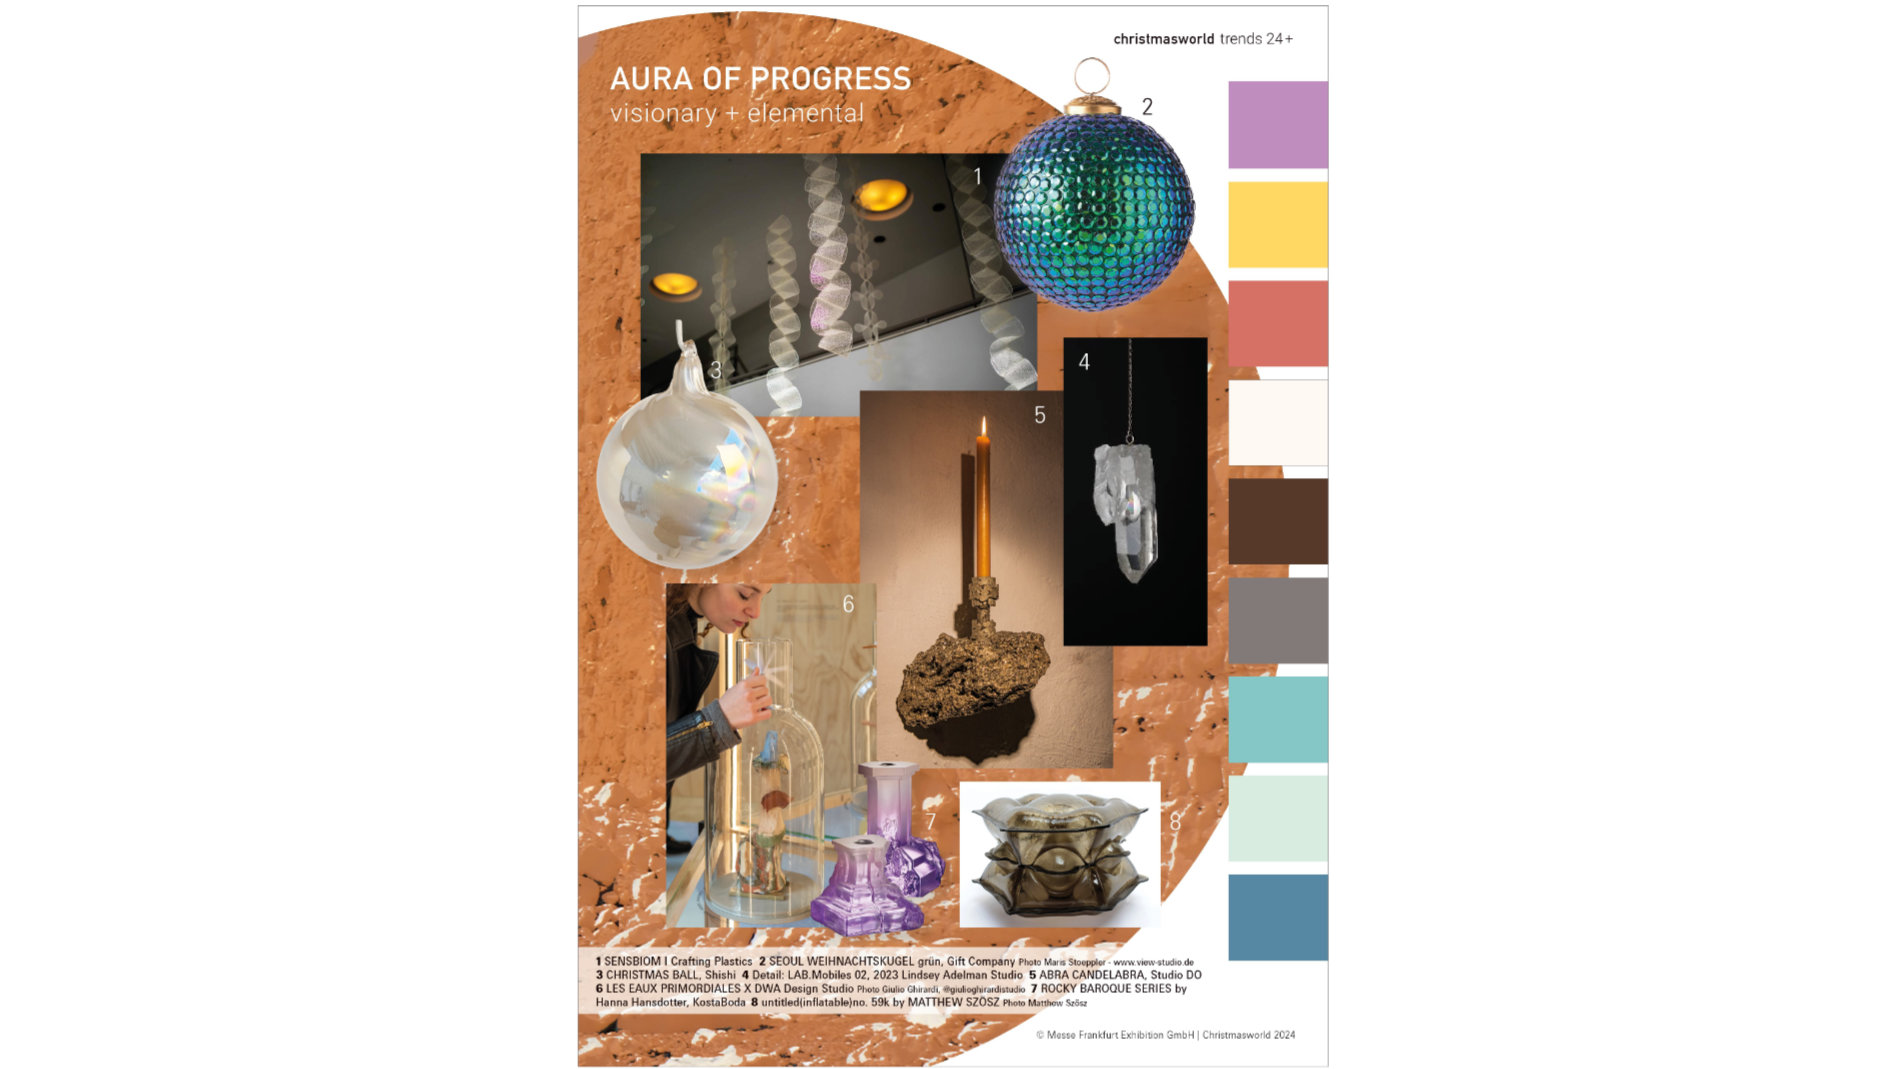 AURA OF PROGRESS_visionary + elemental plays with contrasts: Here, archaic-natural elements meet technical innovations and futuristic designs. Graphic: Messe Frankfurt.